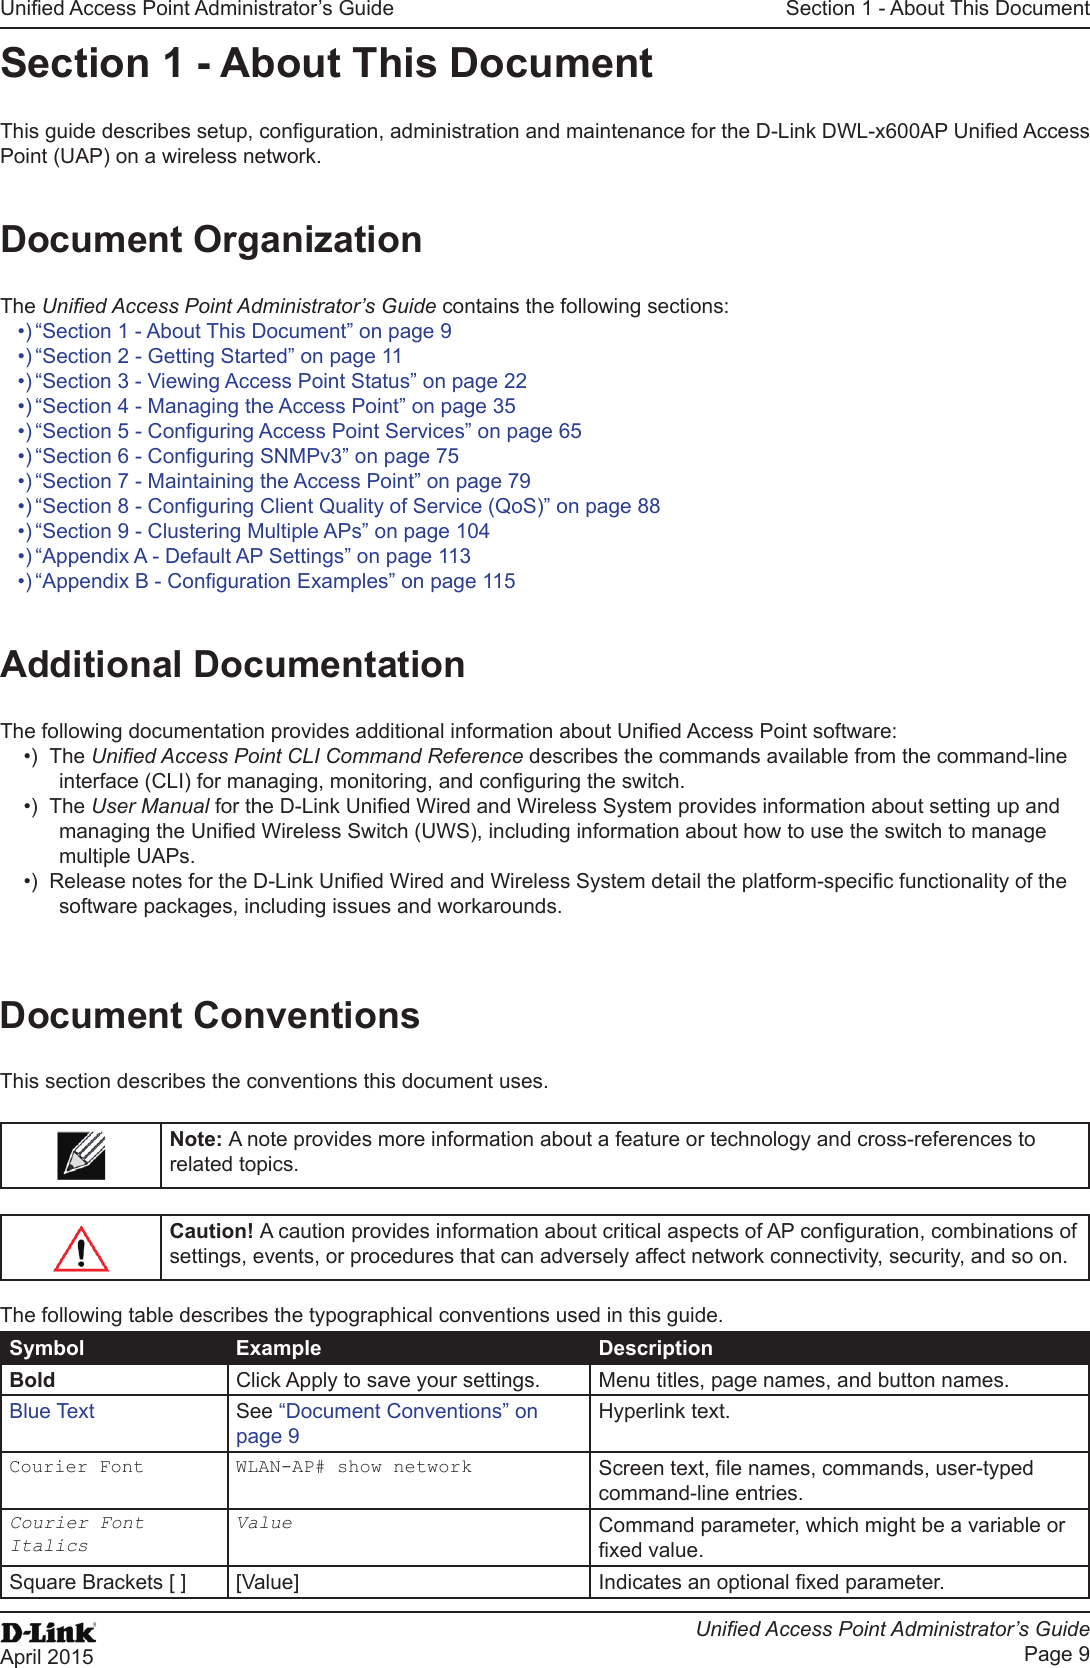 Unied Access Point Administrator’s GuideUnied Access Point Administrator’s GuidePage 9April 2015Section 1 - About This DocumentSection 1 - About This DocumentThis guide describes setup, conguration, administration and maintenance for the D-Link DWL-x600AP Unied Access Point (UAP) on a wireless network.Document OrganizationThe Unied Access Point Administrator’s Guide contains the following sections:•) “Section 1 - About This Document” on page 9•) “Section 2 - Getting Started” on page 11•) “Section 3 - Viewing Access Point Status” on page 22•) “Section 4 - Managing the Access Point” on page 35•) “Section 5 - Conguring Access Point Services” on page 65•) “Section 6 - Conguring SNMPv3” on page 75•) “Section 7 - Maintaining the Access Point” on page 79•) “Section 8 - Conguring Client Quality of Service (QoS)” on page 88•) “Section 9 - Clustering Multiple APs” on page 104•) “Appendix A - Default AP Settings” on page 113•) “Appendix B - Conguration Examples” on page 115Additional DocumentationThe following documentation provides additional information about Unied Access Point software:•)  The Unied Access Point CLI Command Reference describes the commands available from the command-line interface (CLI) for managing, monitoring, and conguring the switch.•)  The User Manual for the D-Link Unied Wired and Wireless System provides information about setting up and managing the Unied Wireless Switch (UWS), including information about how to use the switch to manage multiple UAPs. •)  Release notes for the D-Link Unied Wired and Wireless System detail the platform-specic functionality of the software packages, including issues and workarounds.Document ConventionsThis section describes the conventions this document uses.Note: A note provides more information about a feature or technology and cross-references to related topics.Caution! A caution provides information about critical aspects of AP conguration, combinations of settings, events, or procedures that can adversely affect network connectivity, security, and so on.The following table describes the typographical conventions used in this guide.Symbol Example DescriptionBold Click Apply to save your settings. Menu titles, page names, and button names.Blue Text See “Document Conventions” on page 9Hyperlink text.Courier Font WLAN-AP# show network Screen text, le names, commands, user-typed command-line entries.Courier Font ItalicsValue Command parameter, which might be a variable or xed value.Square Brackets [ ] [Value] Indicates an optional xed parameter.